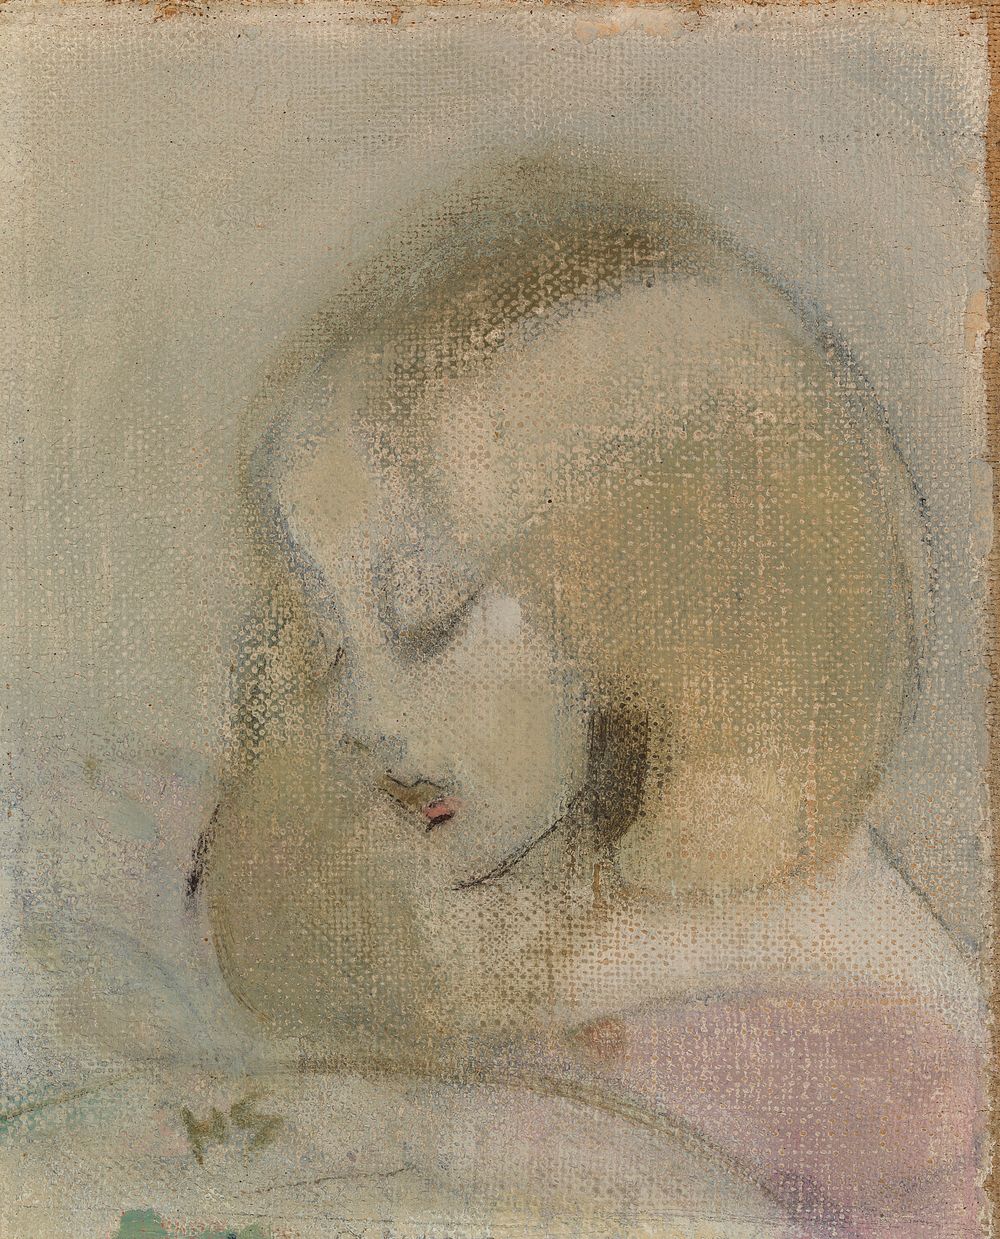 Annuli reading, 1923 by Helene Schjerfbeck